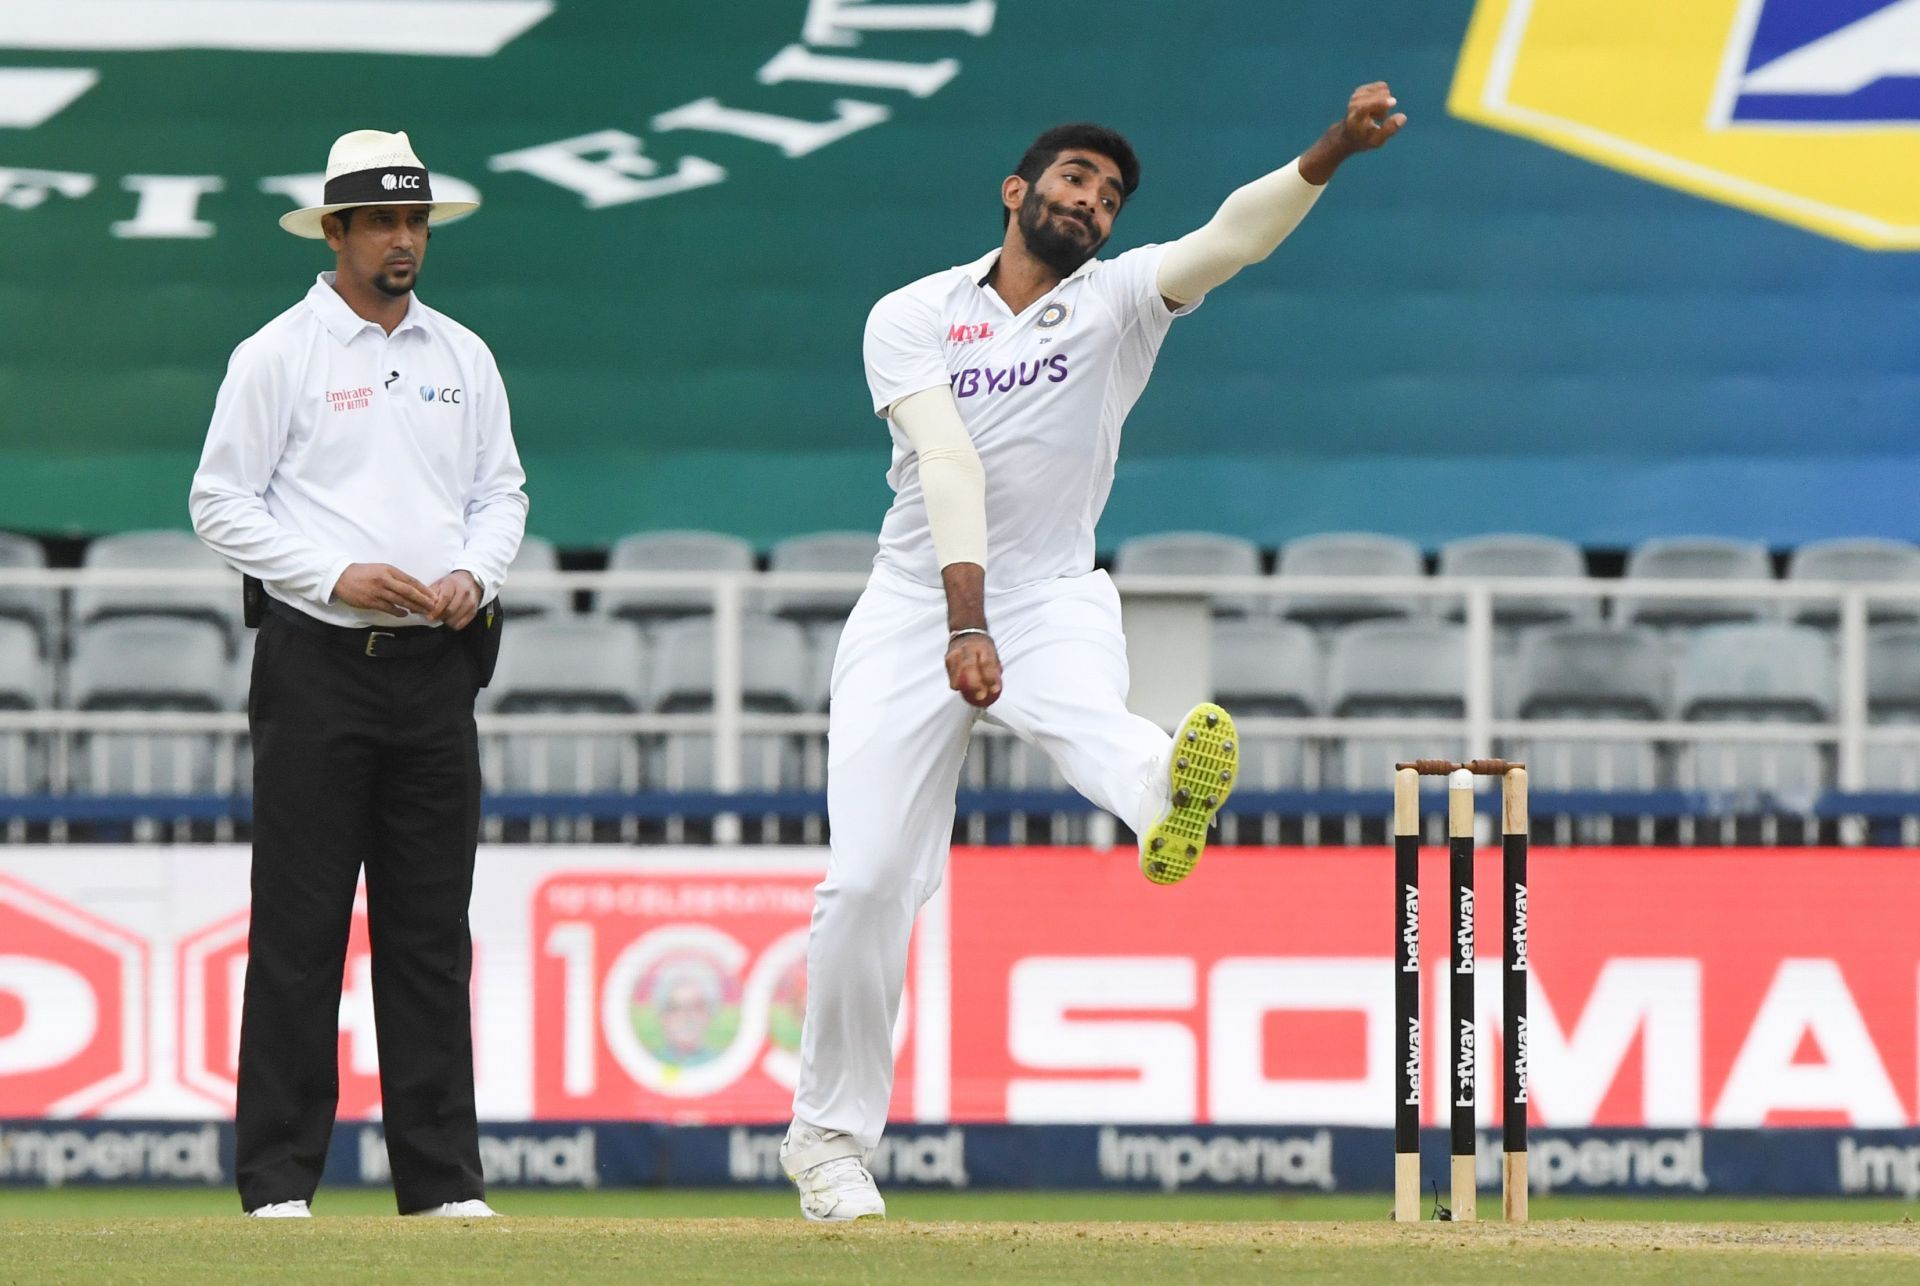 Jasprit Bumrah was not at his best in the Johannesburg Test